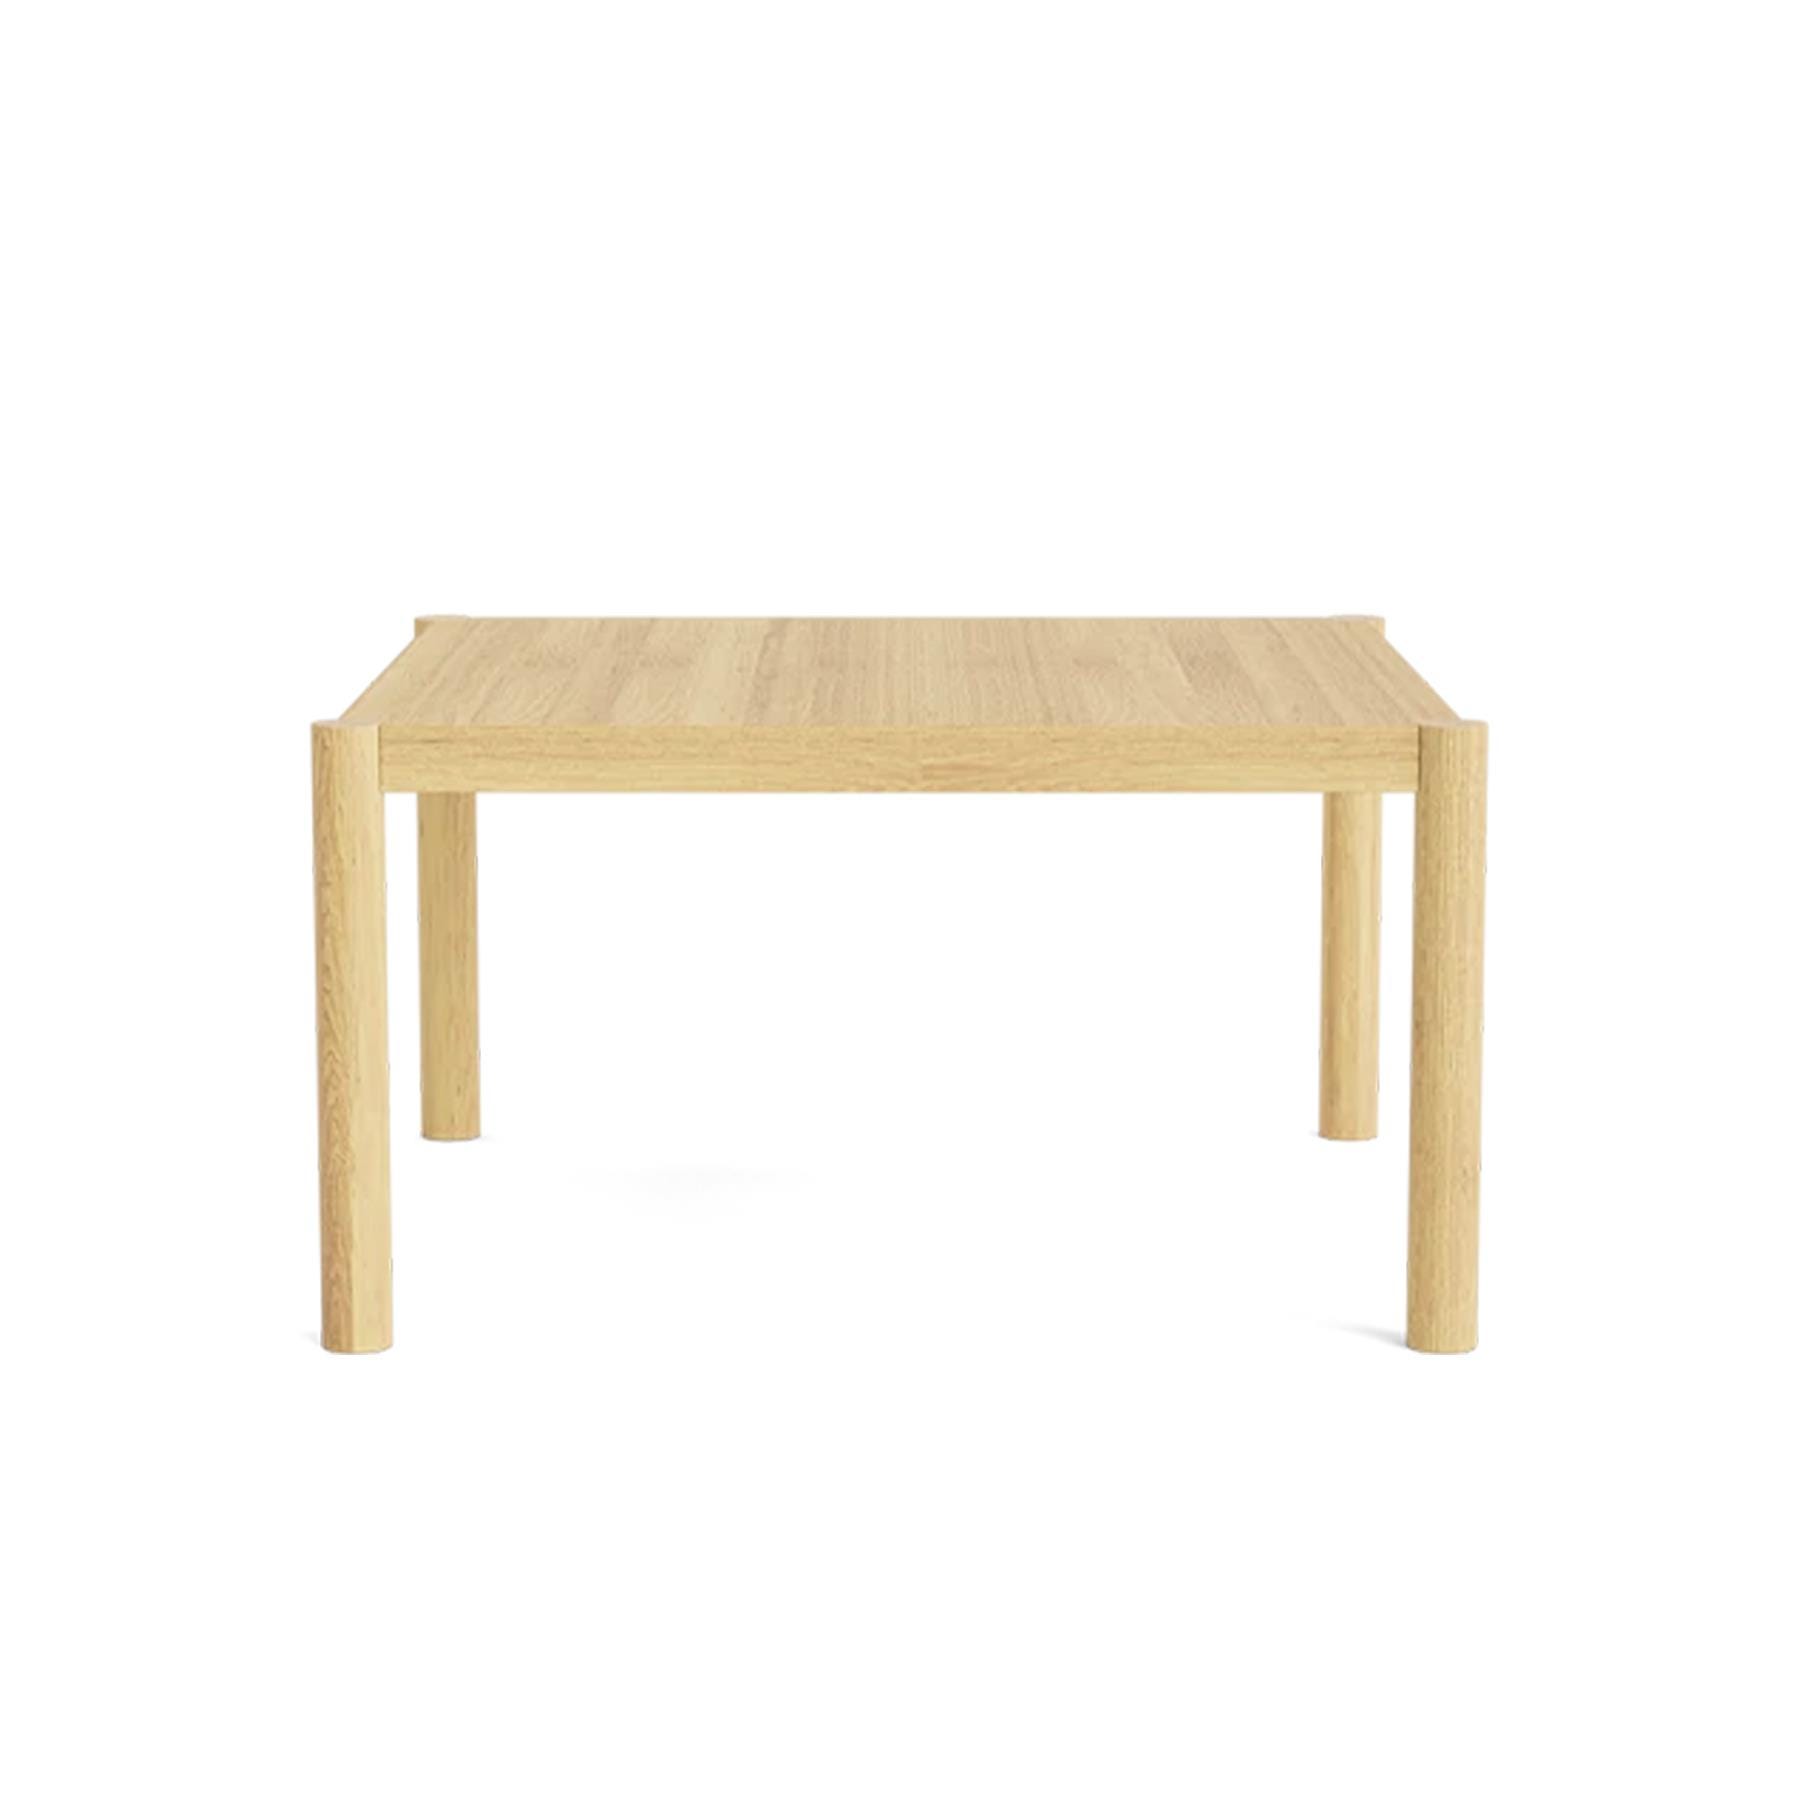 Make Nordic Tammi Coffee Table Square Height 45cm Oak Natural Oil Light Wood Designer Furniture From Holloways Of Ludlow